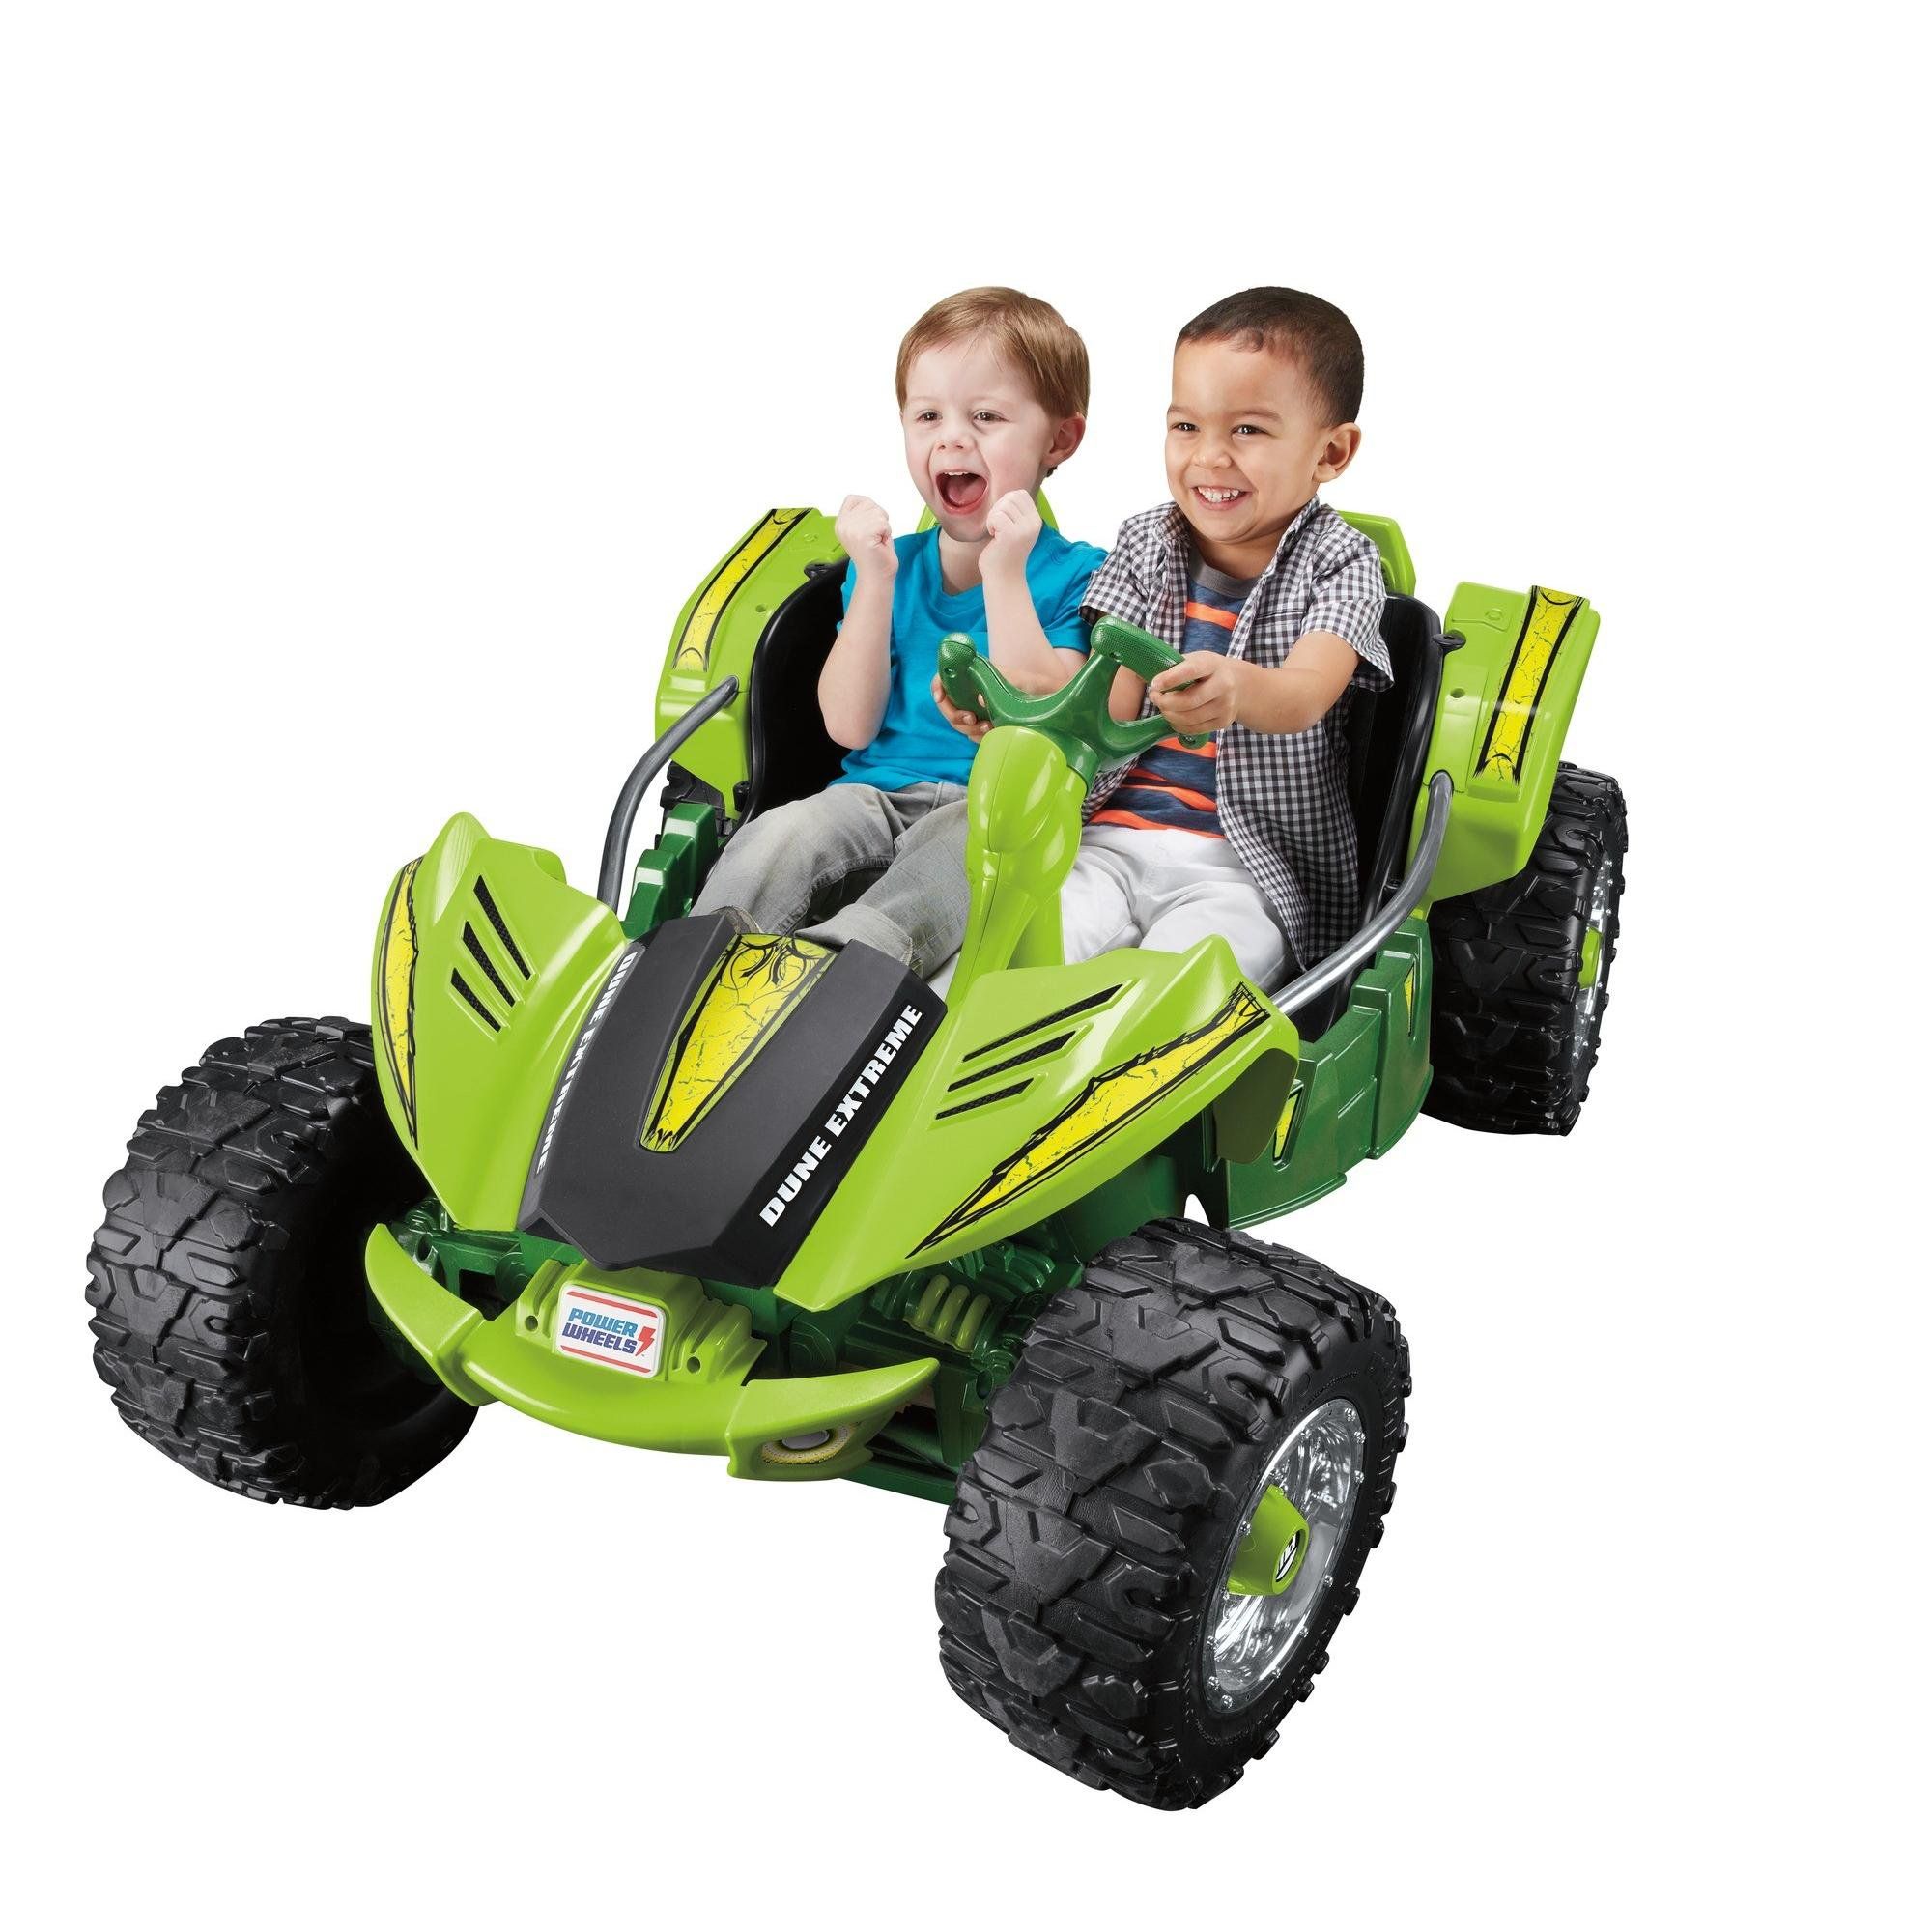 12V Power Wheels Dune Racer Extreme Battery-Powered Ride On Toy | Walmart (US)